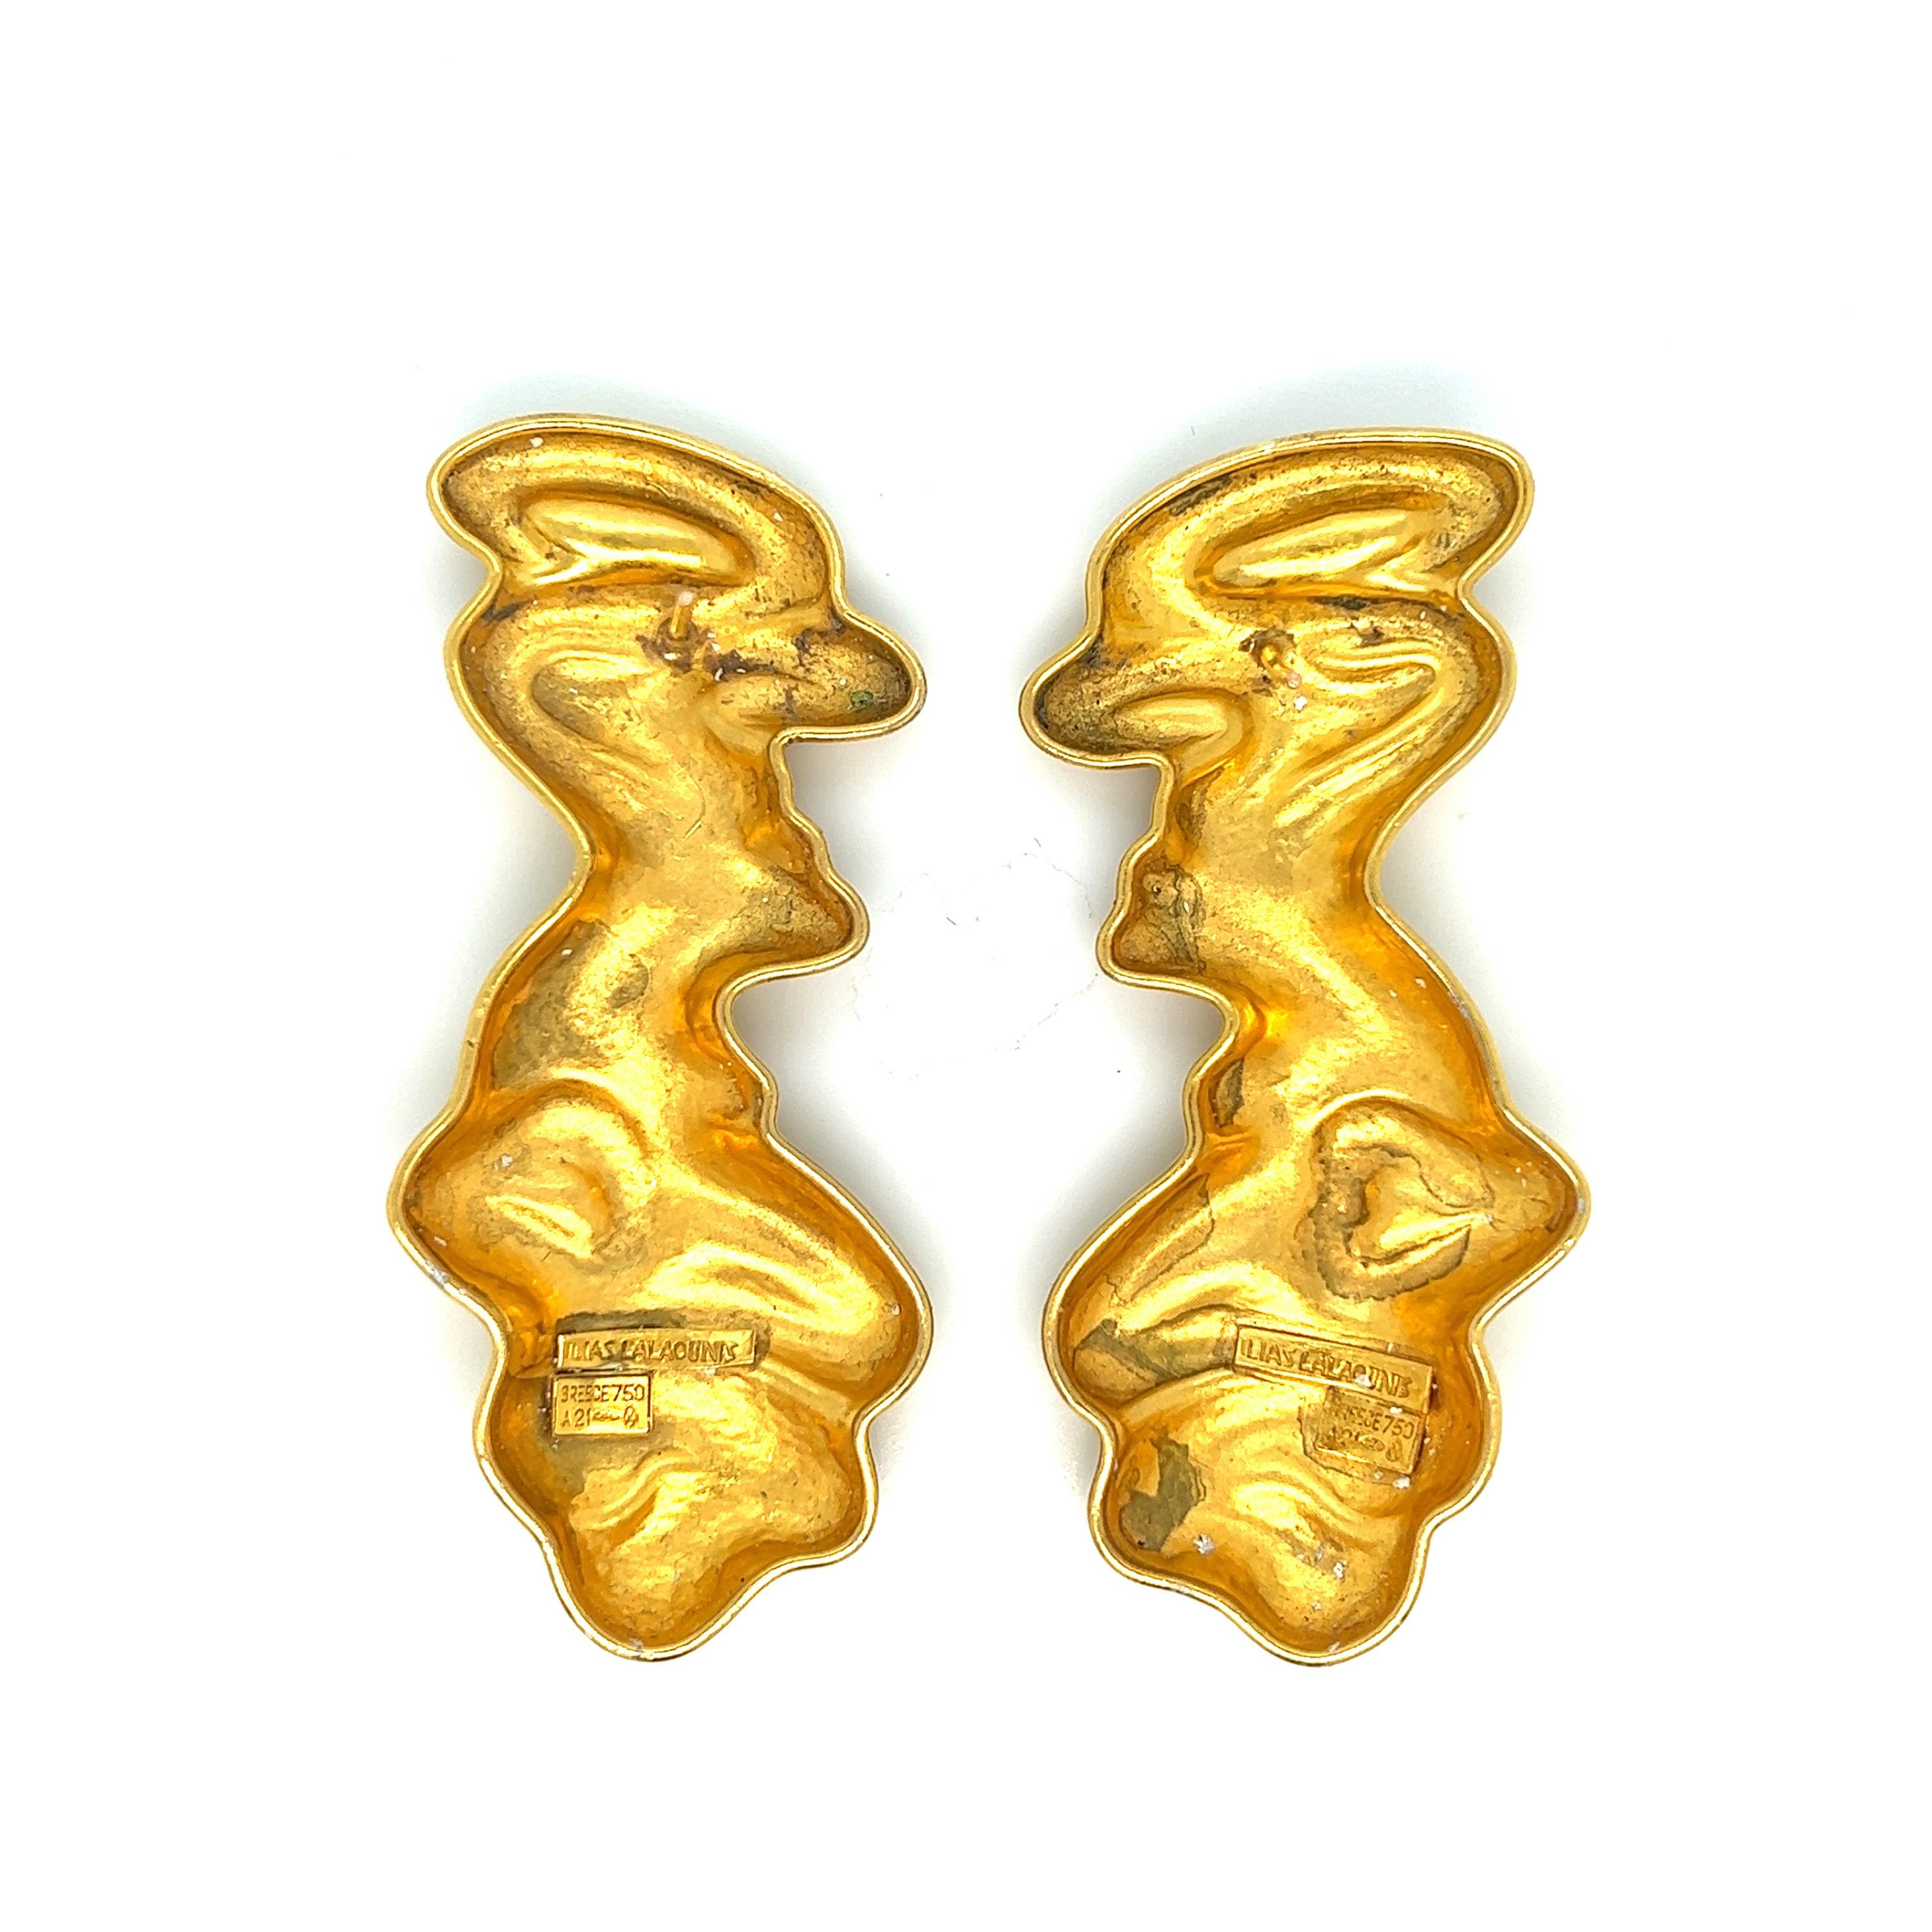 Lalaounis gold drop earrings, made in Greece

22k karat yellow gold; marked Ilias Lalaounis, Greece, A21

Size: width 1.13 inch, length 2.38 inches
Total weight 21.3 grams